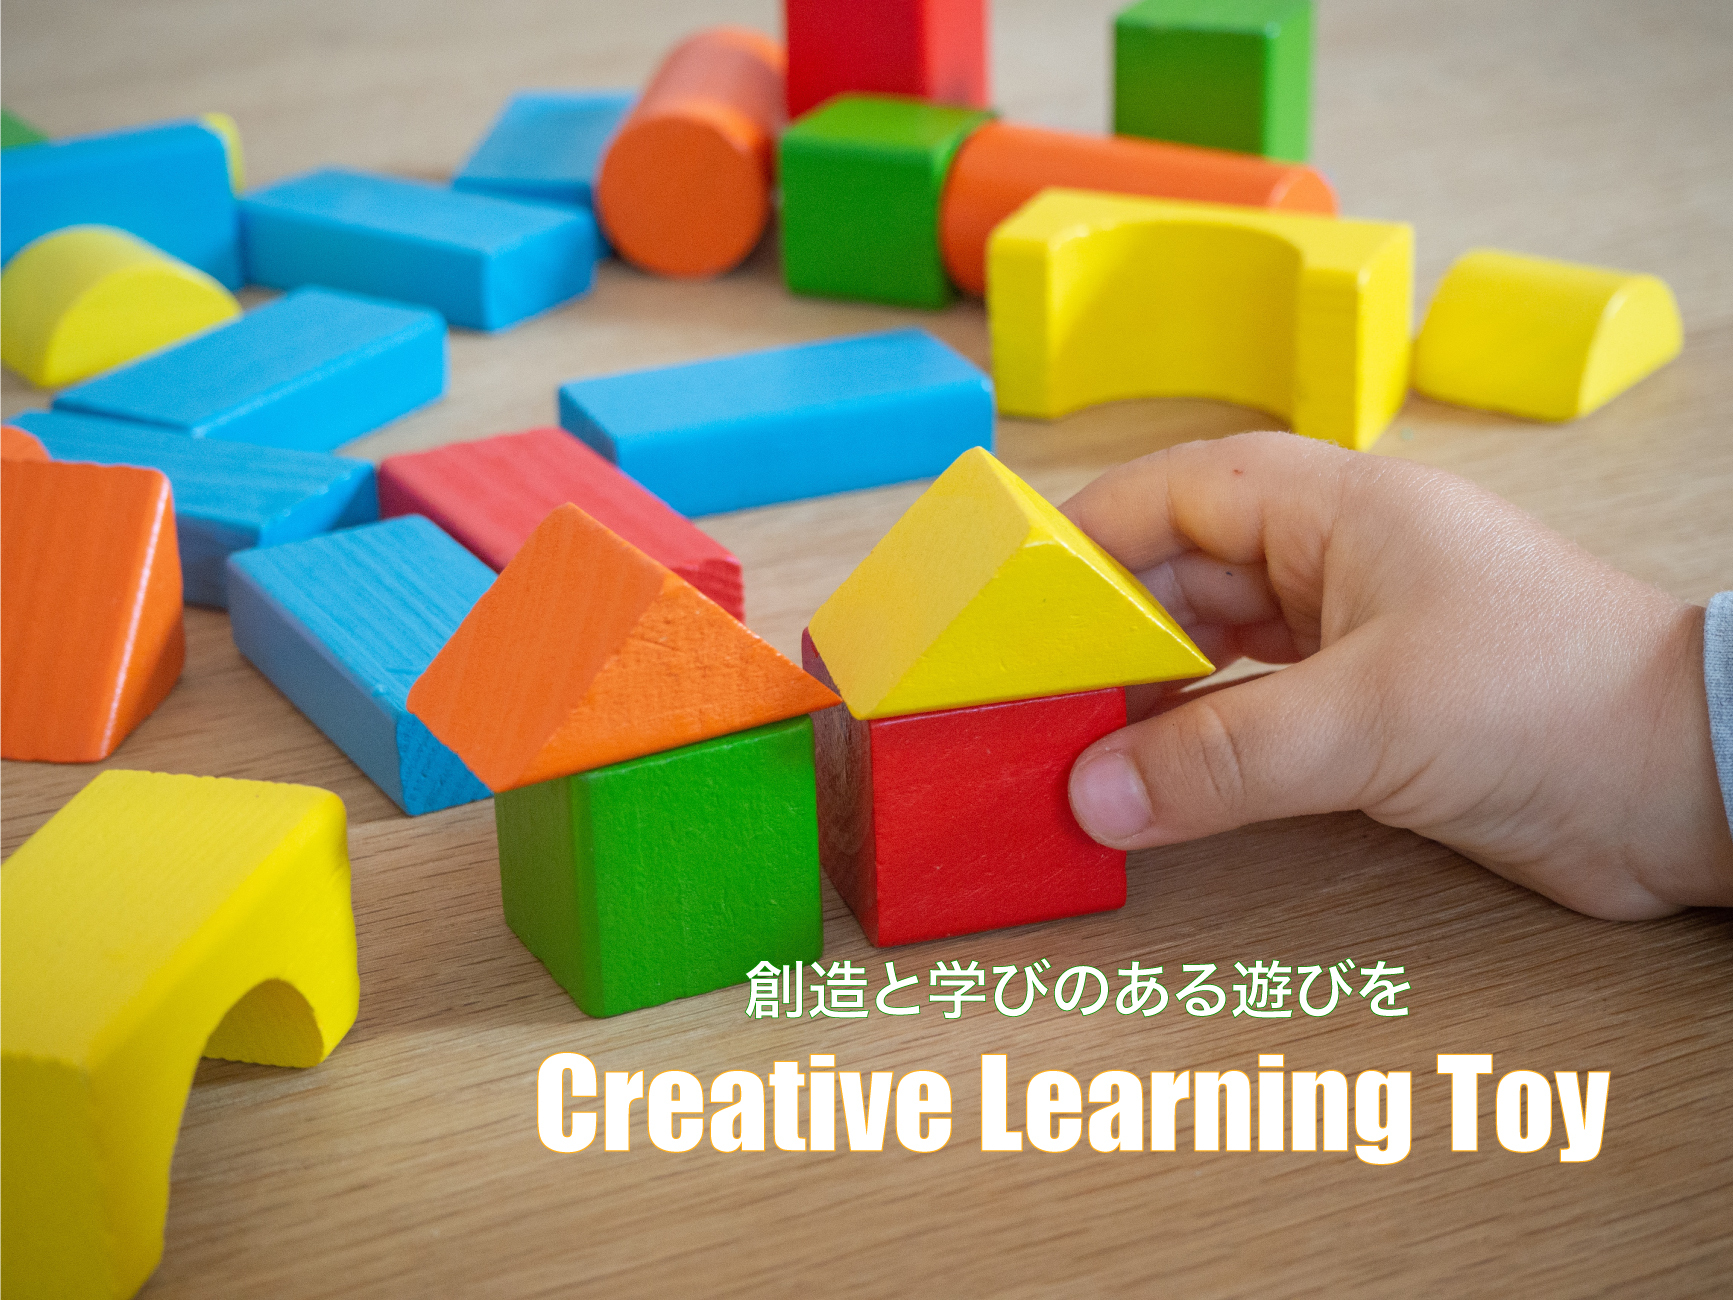 Creative Learning Toy